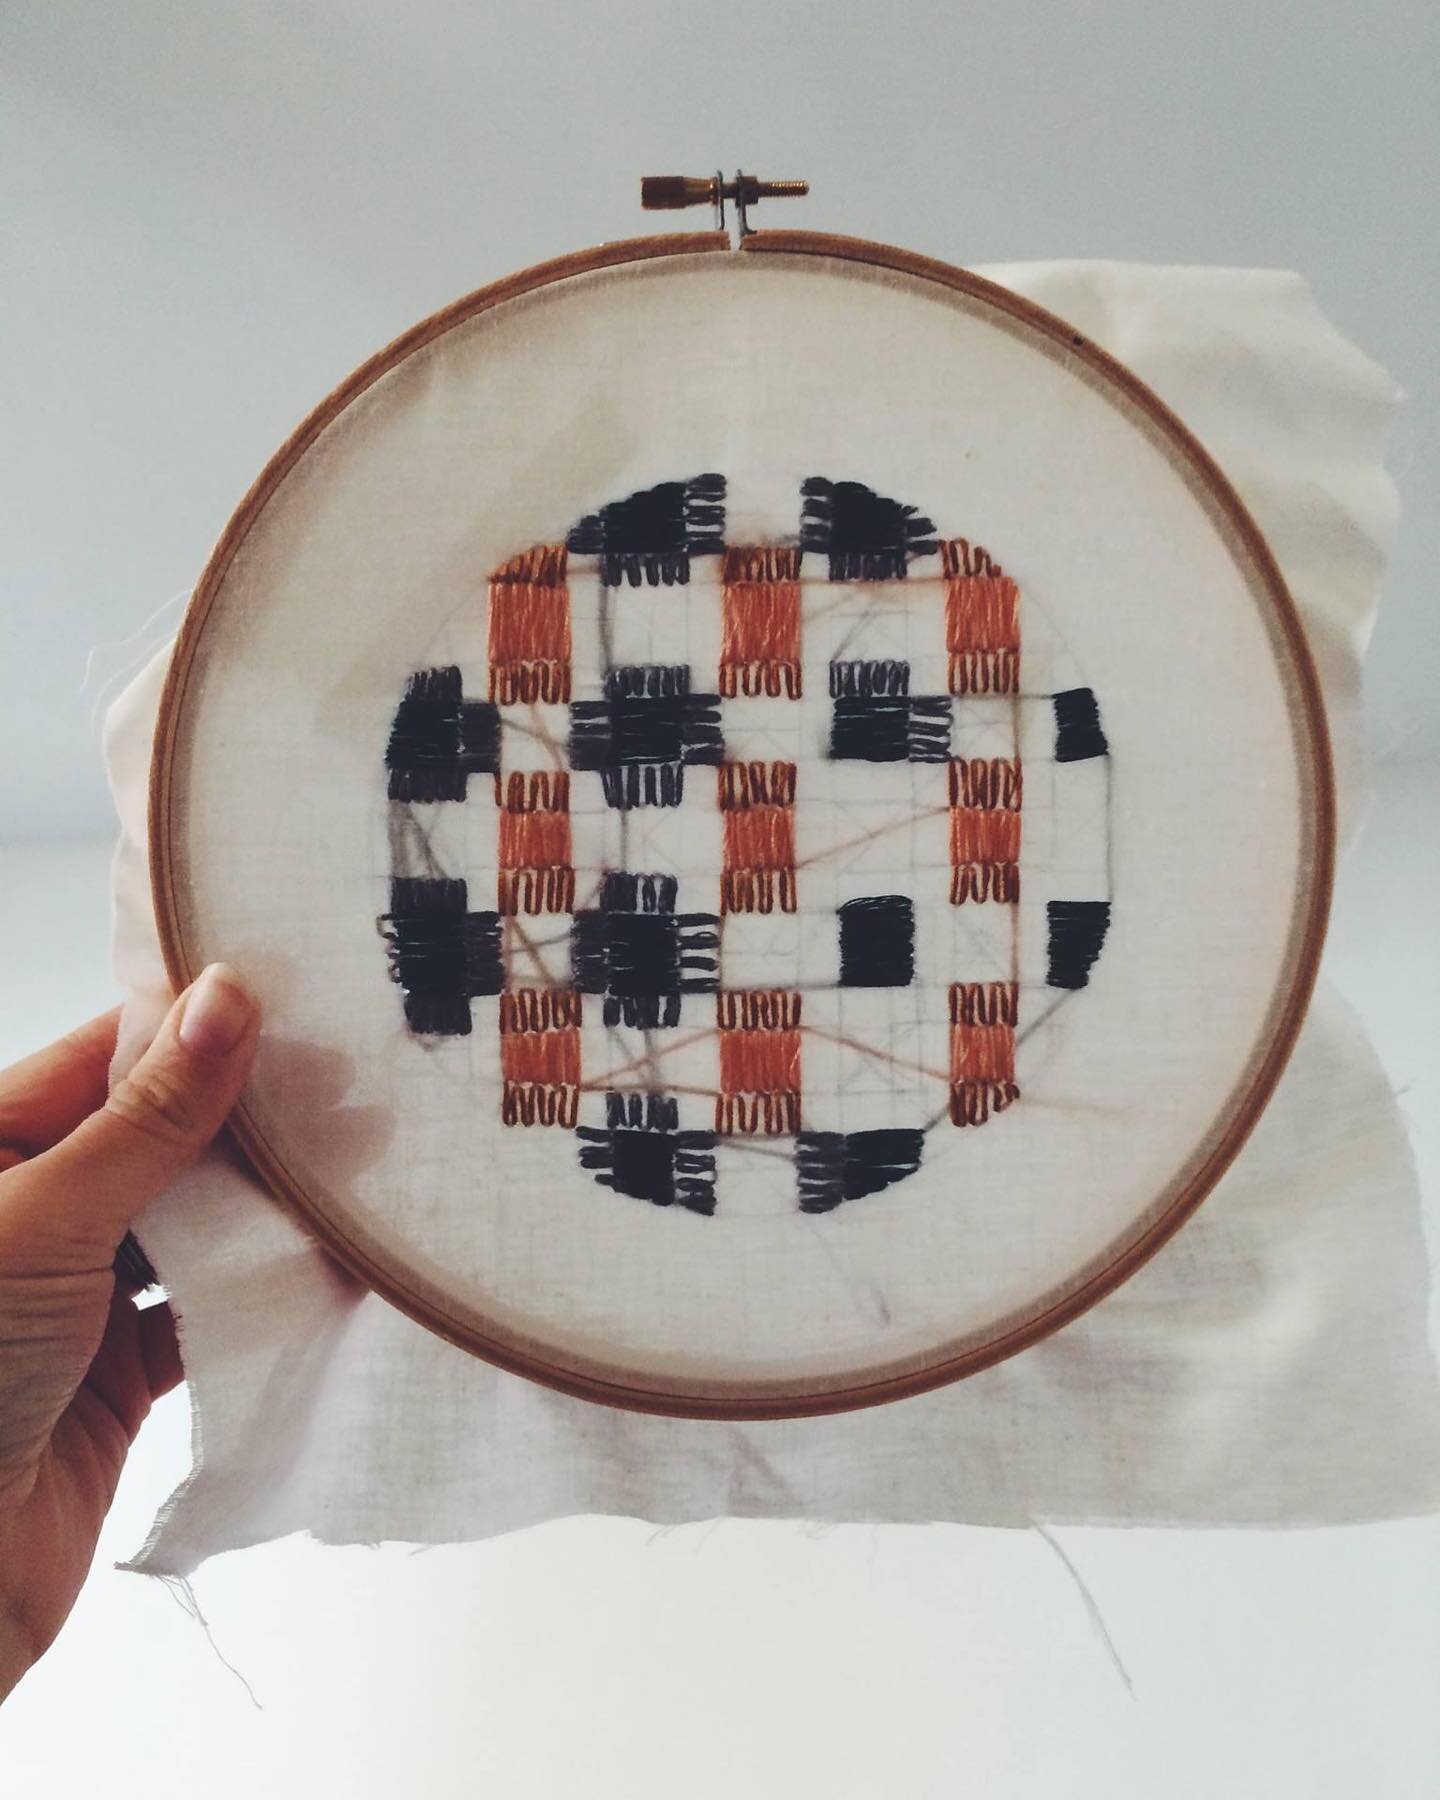 five years ago I had just graduated from college and I started learning needlework and it changed my life and gave me work to do (and led to an unexpected career!) and I&rsquo;m really grateful for the way it feels, the invitation to center I&rsquo;v